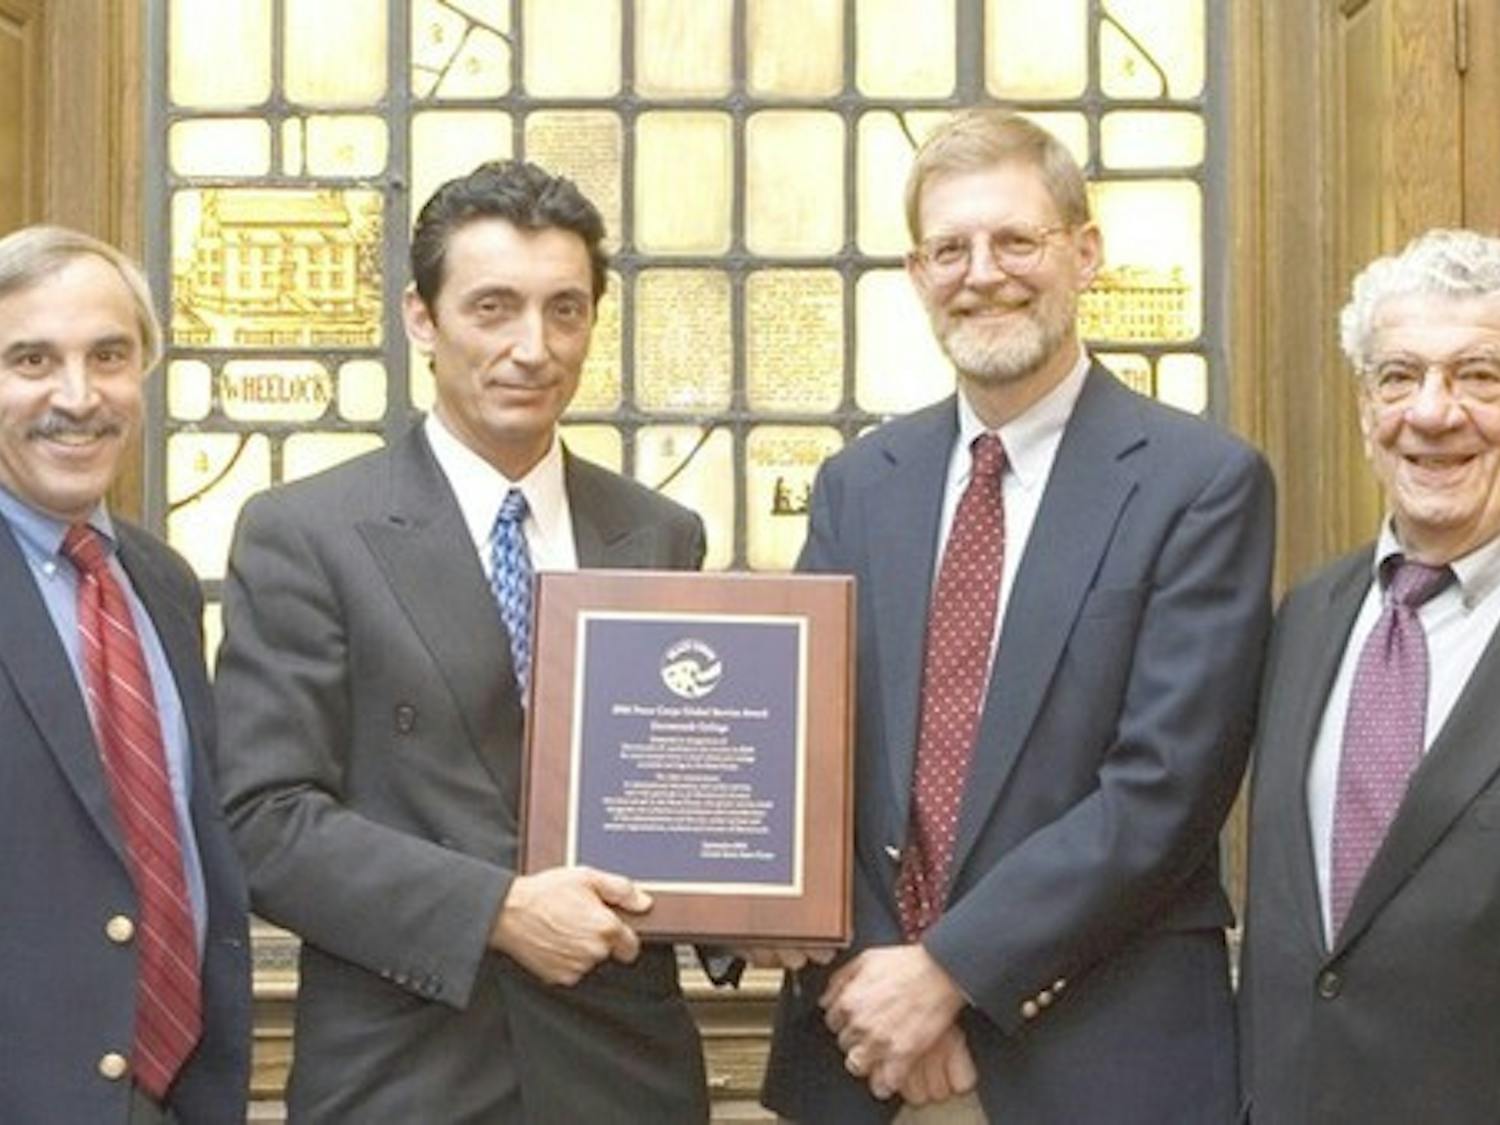 Peace Corps representative James Arena-DeRosa (second from left) presents the 200 Global Service Award to Career Services Director Skip Sturman, Acting Dean of the College Dan Nelson and professor John Rassias Wednesday.